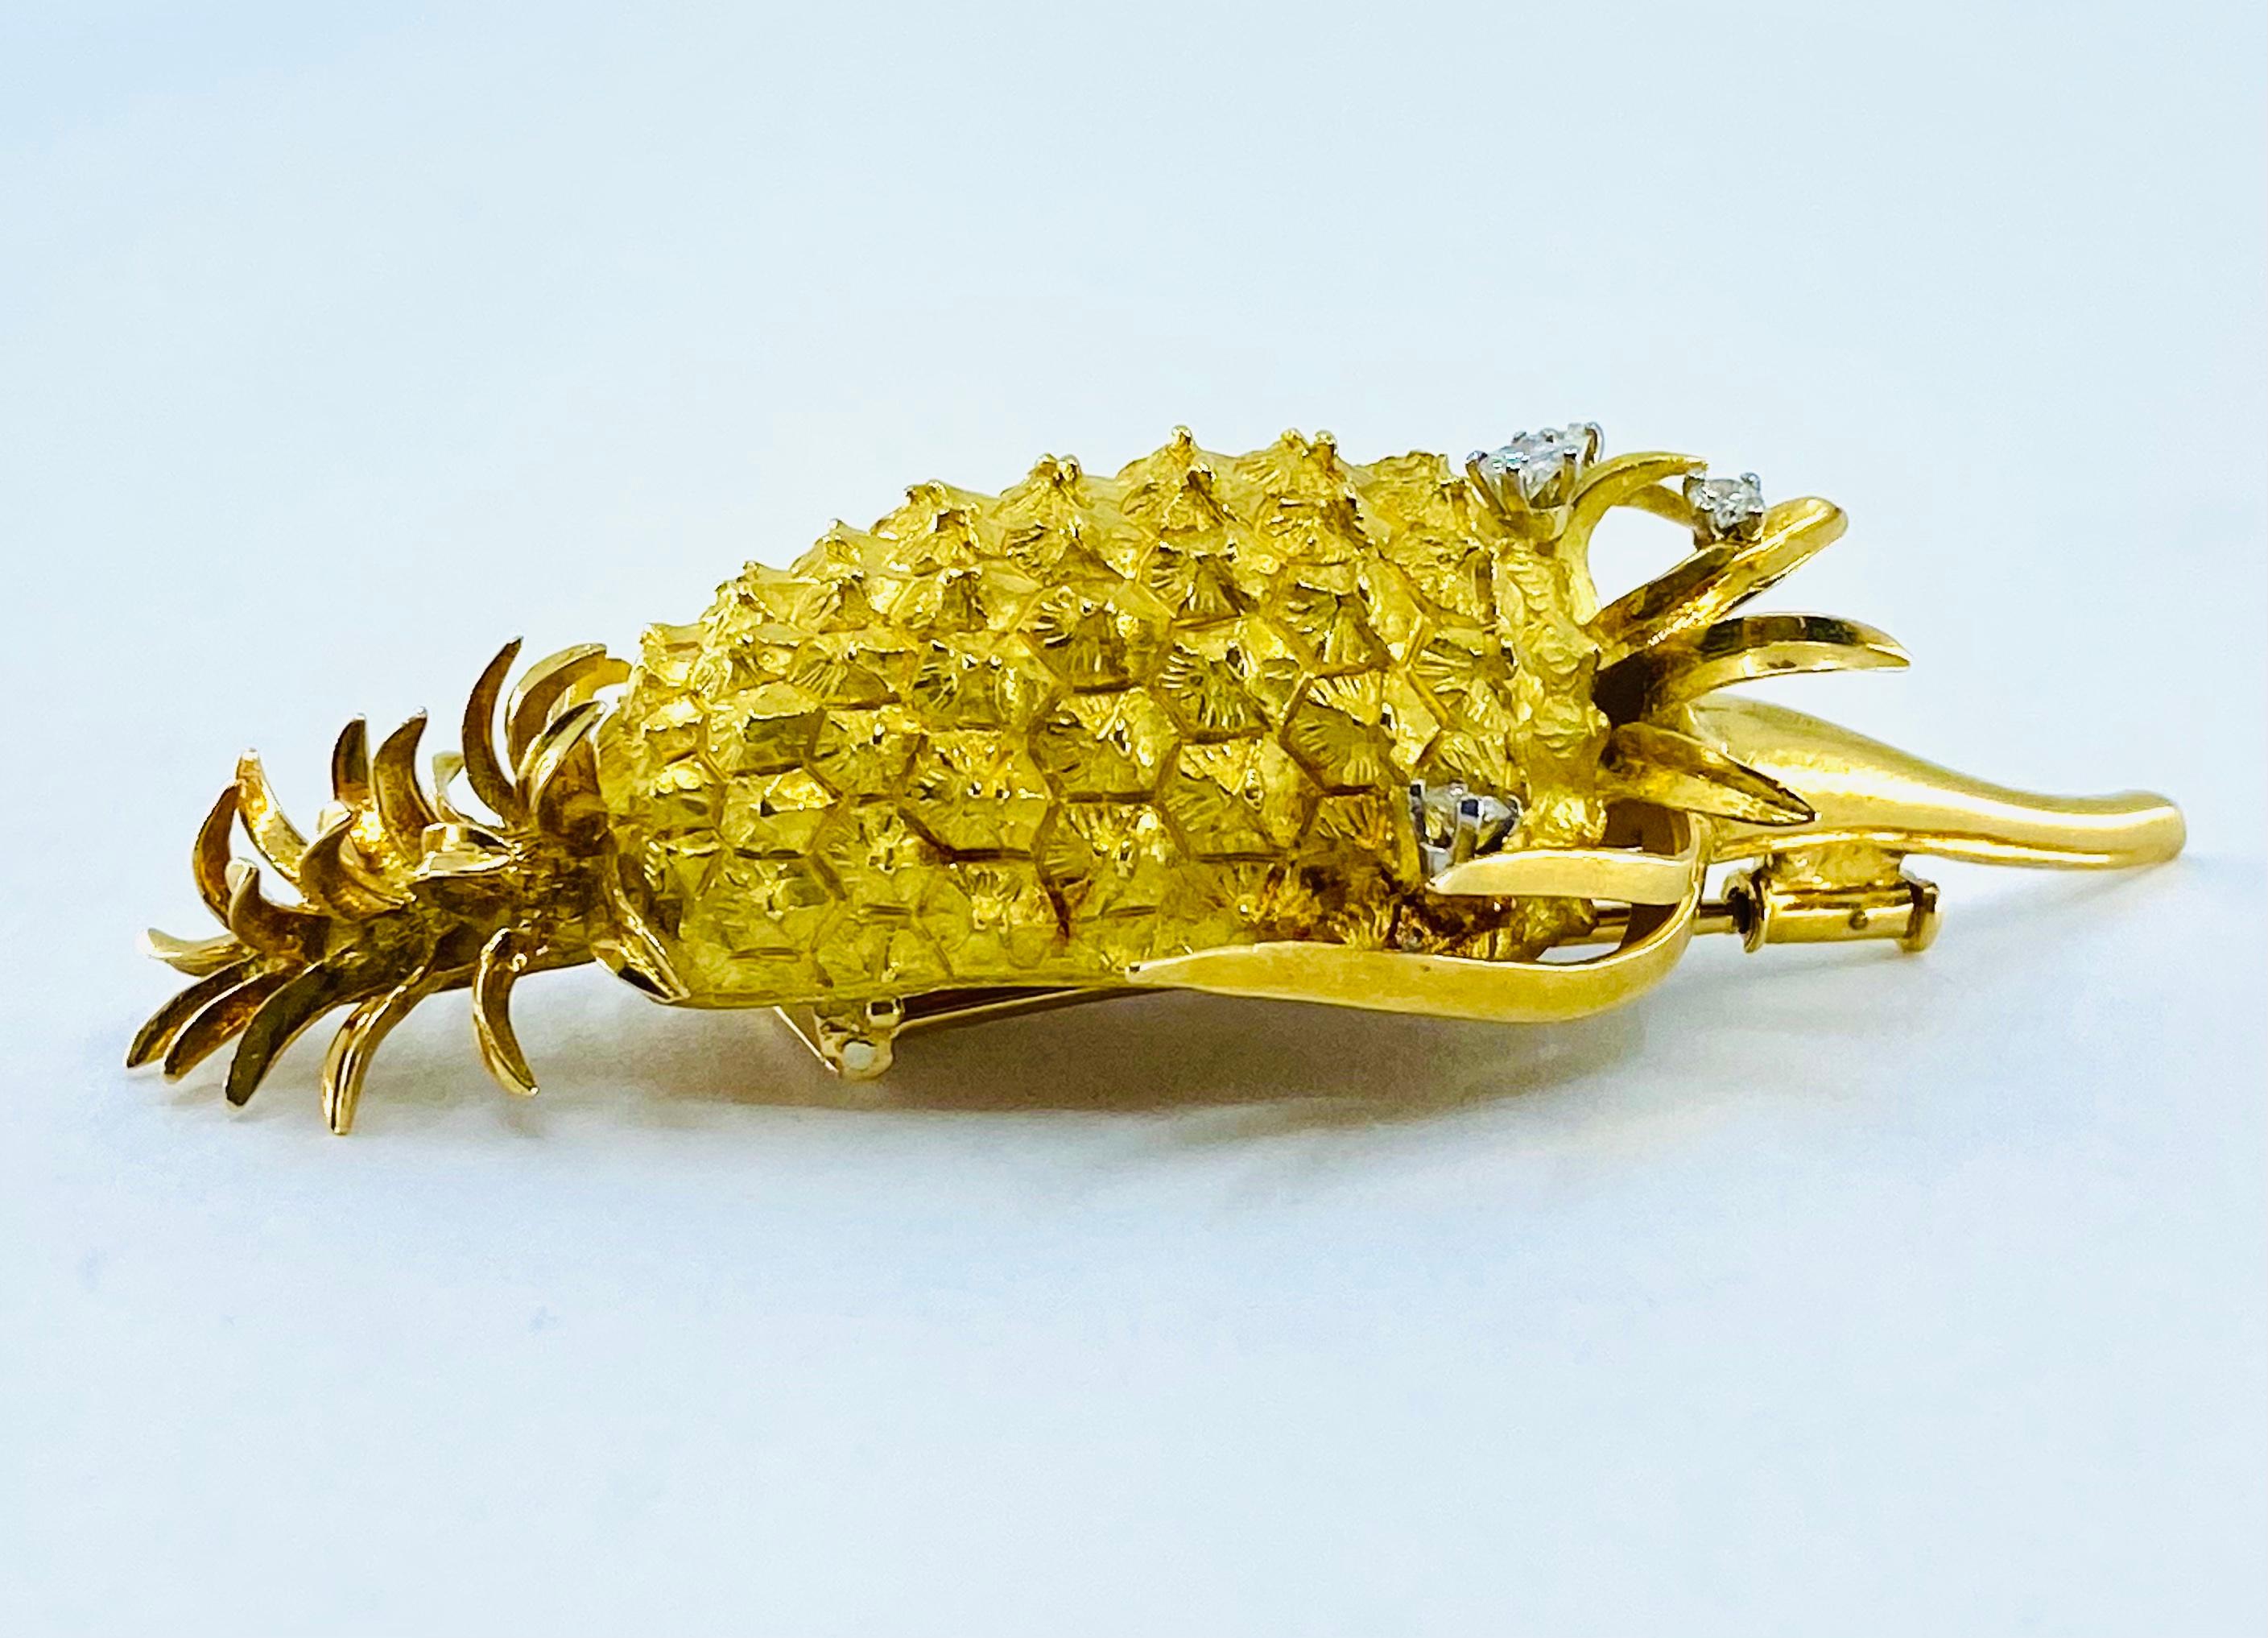 rubygold pineapple